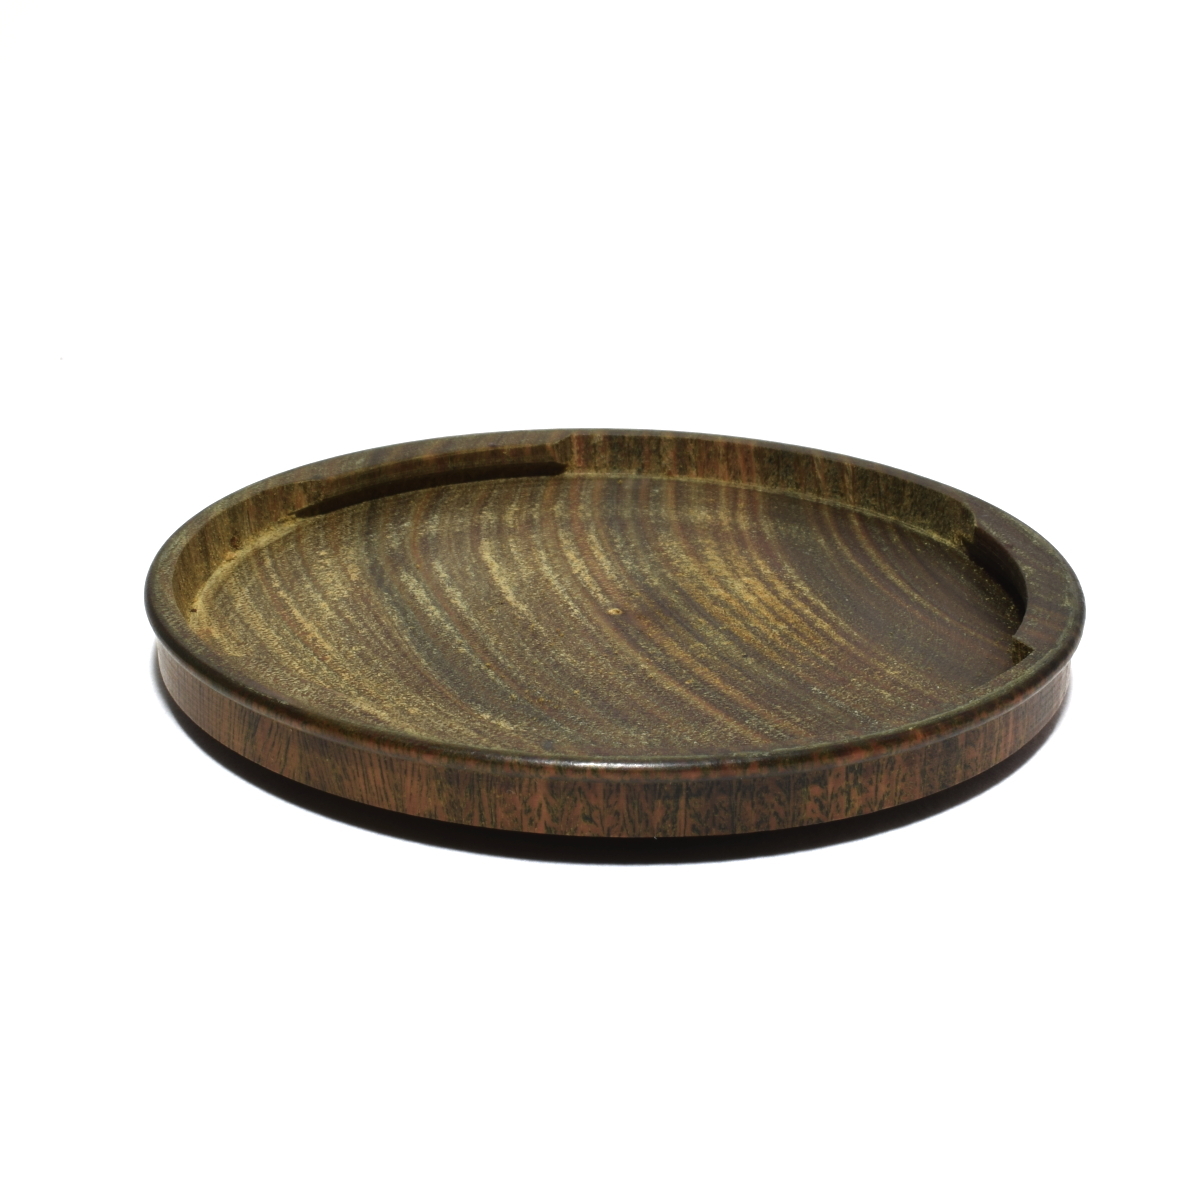  incense case green . screw type cover [k1-3]